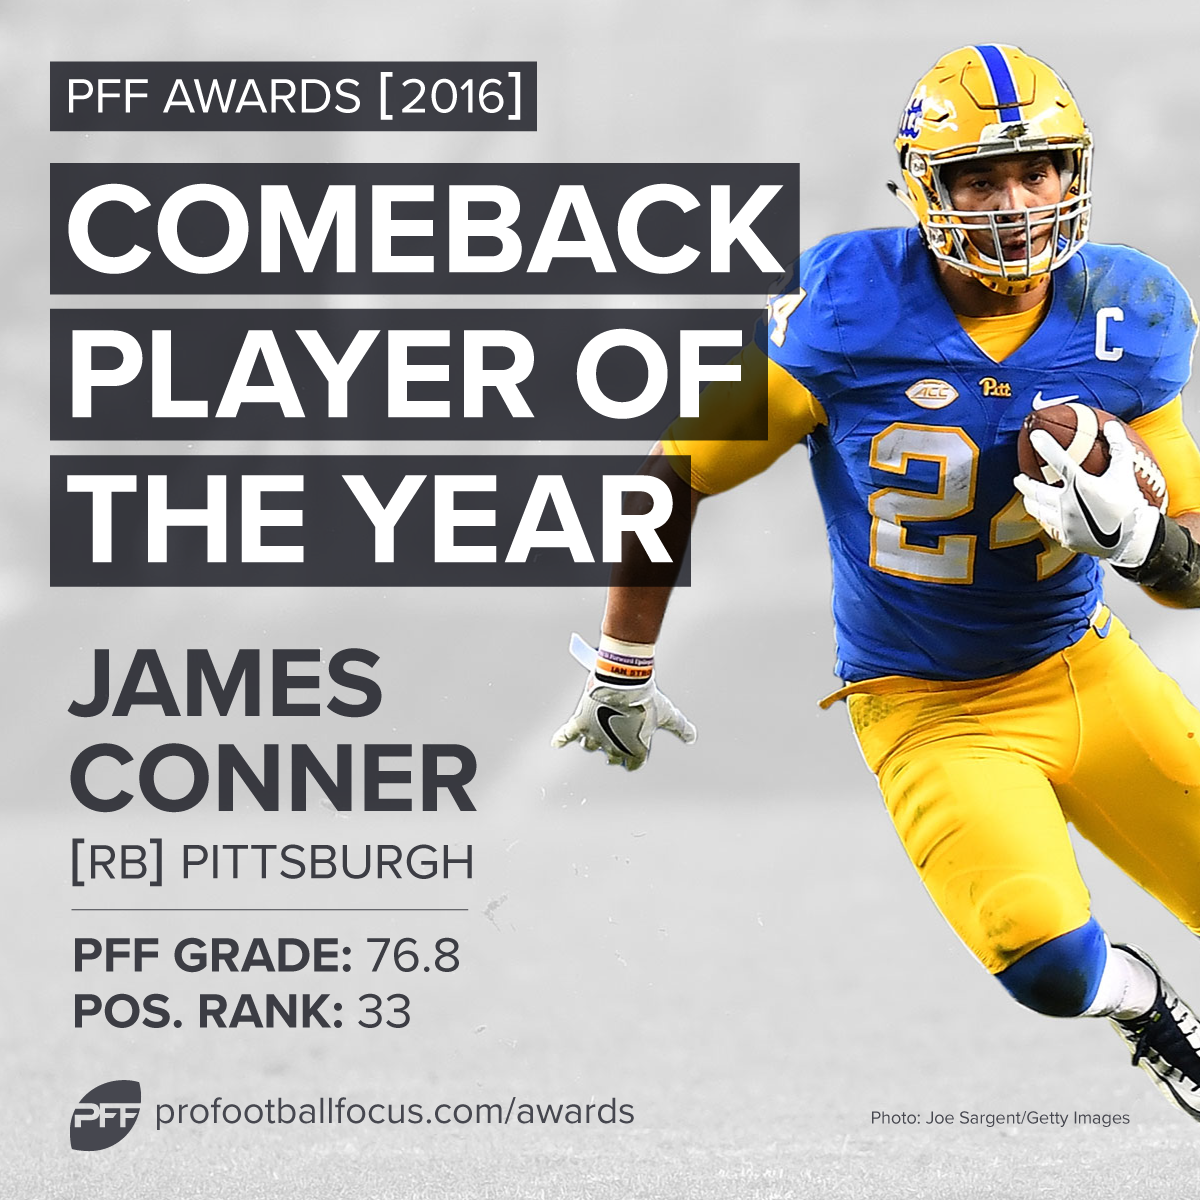 conner_comeback-player-of-the-year